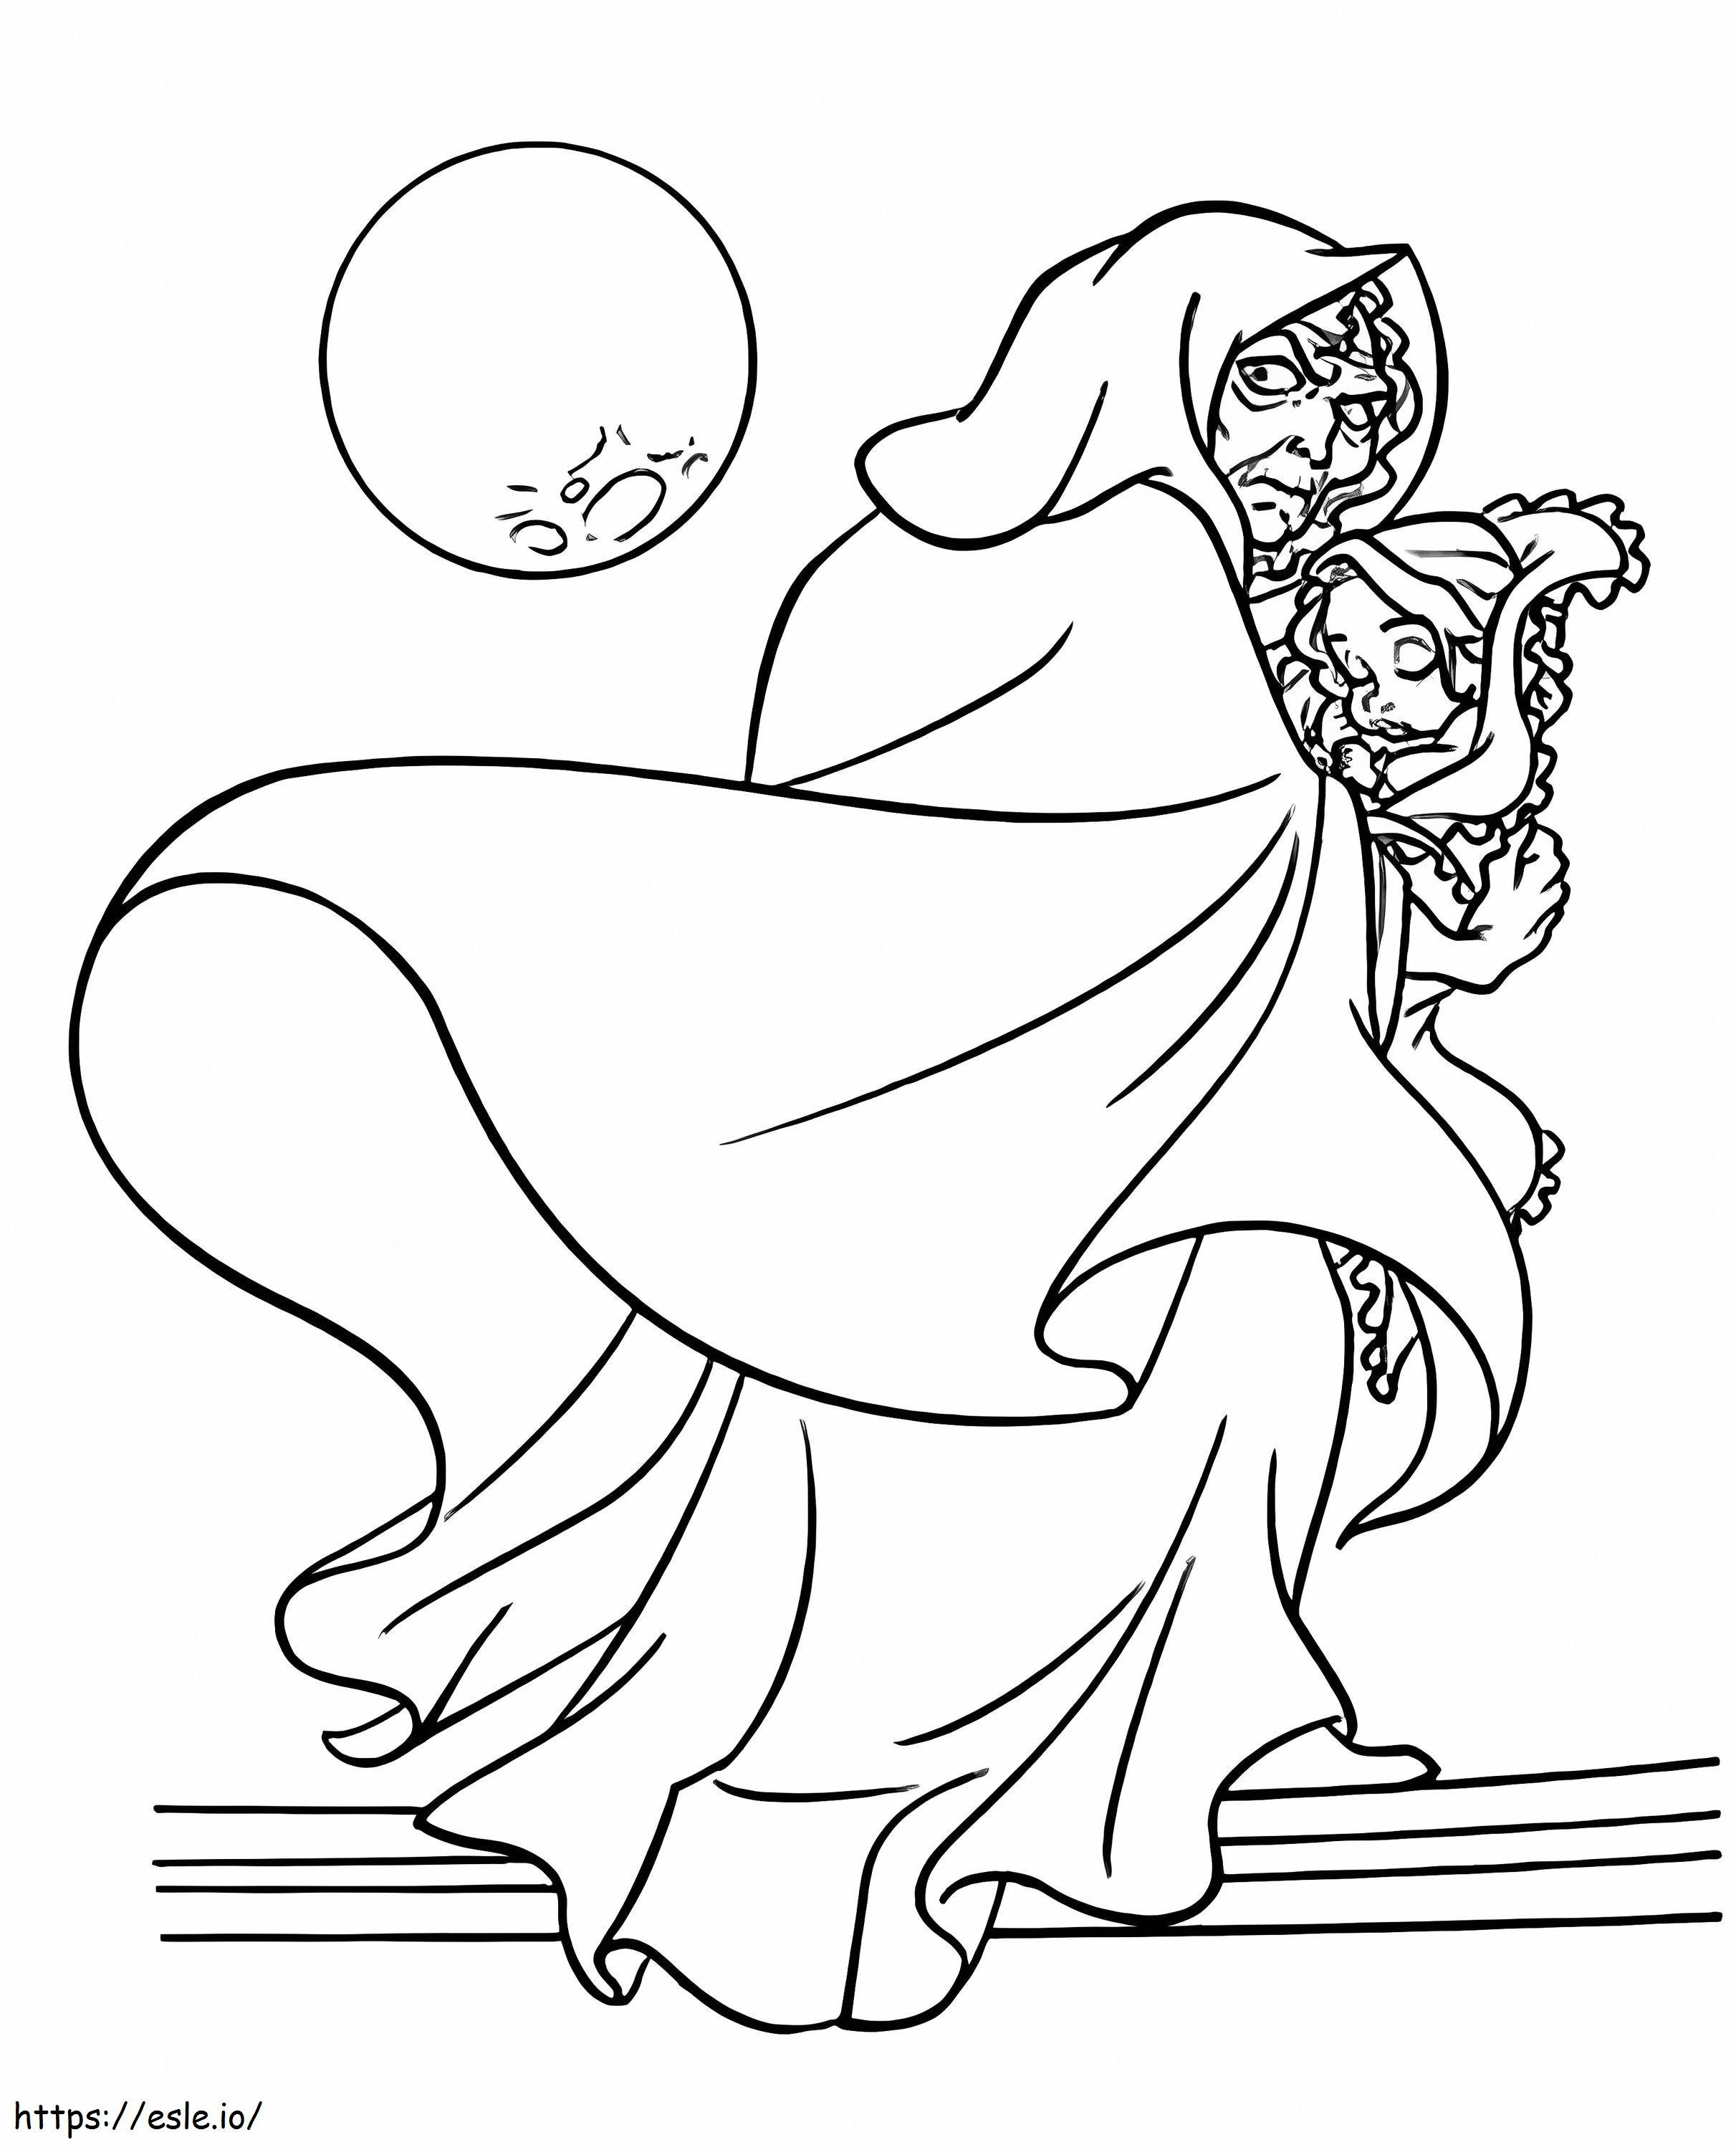 Mother Gothel And Baby Rapunzel coloring page